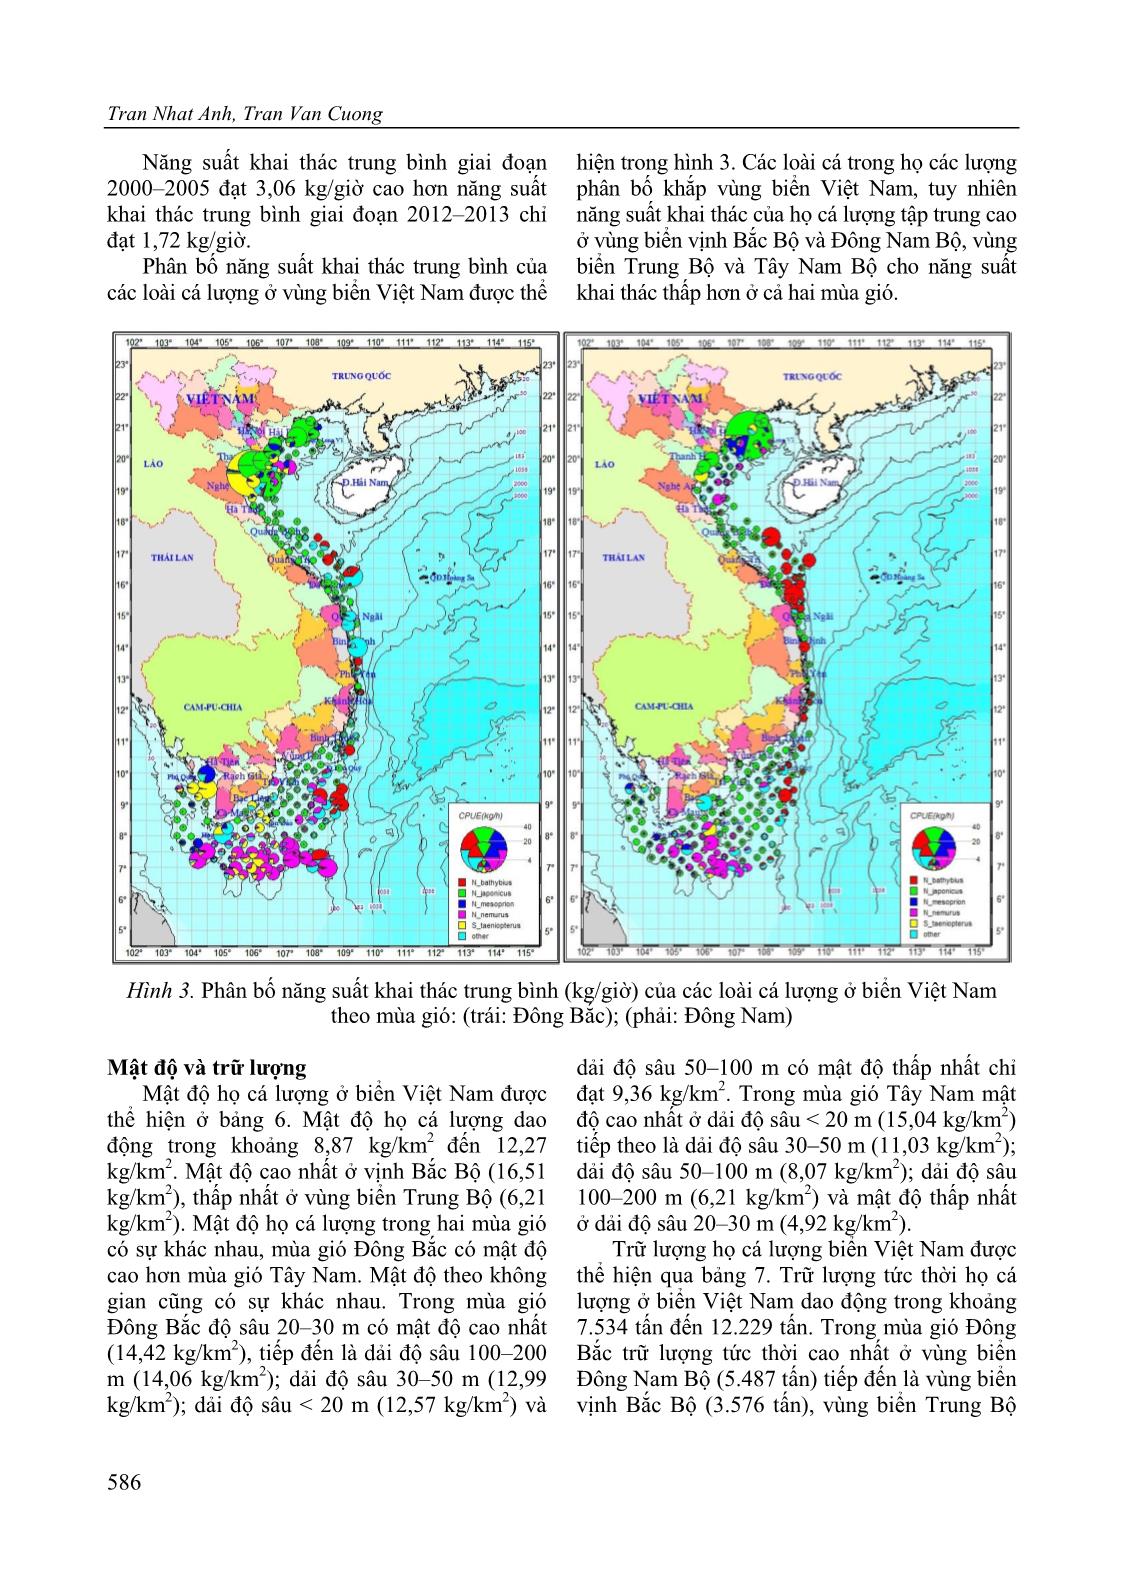 Threadfin bream (Nemipteridae) resources in the sea of Vietnam based on the bottom trawl surveys trang 8